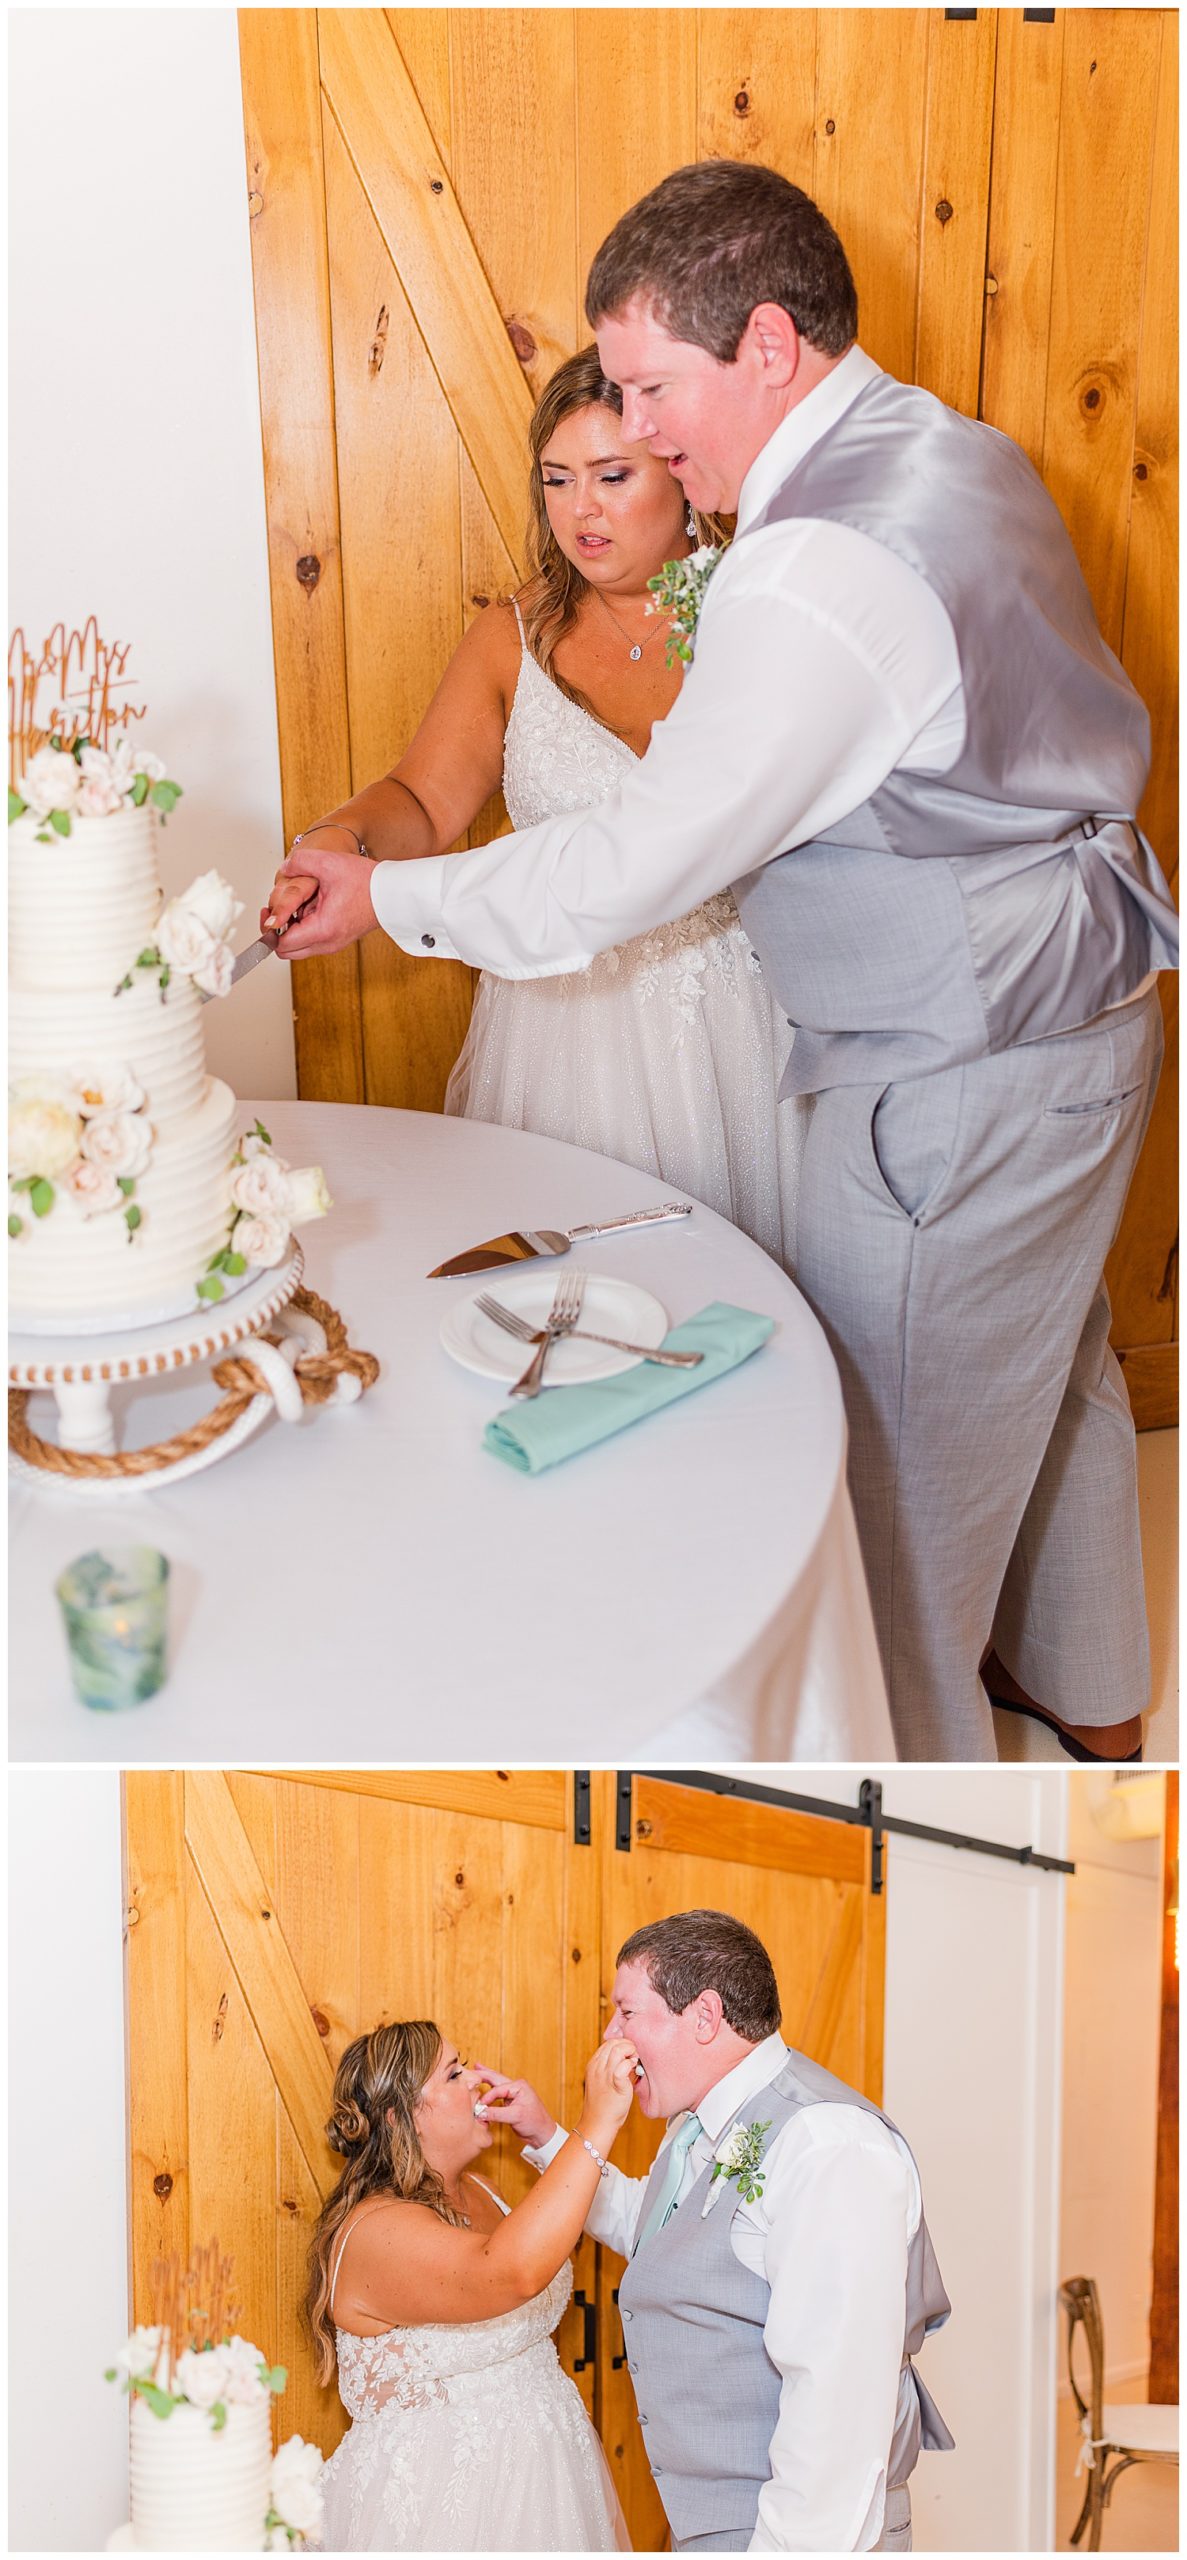 bride and groom cutting the cake at The River Room wedding venue